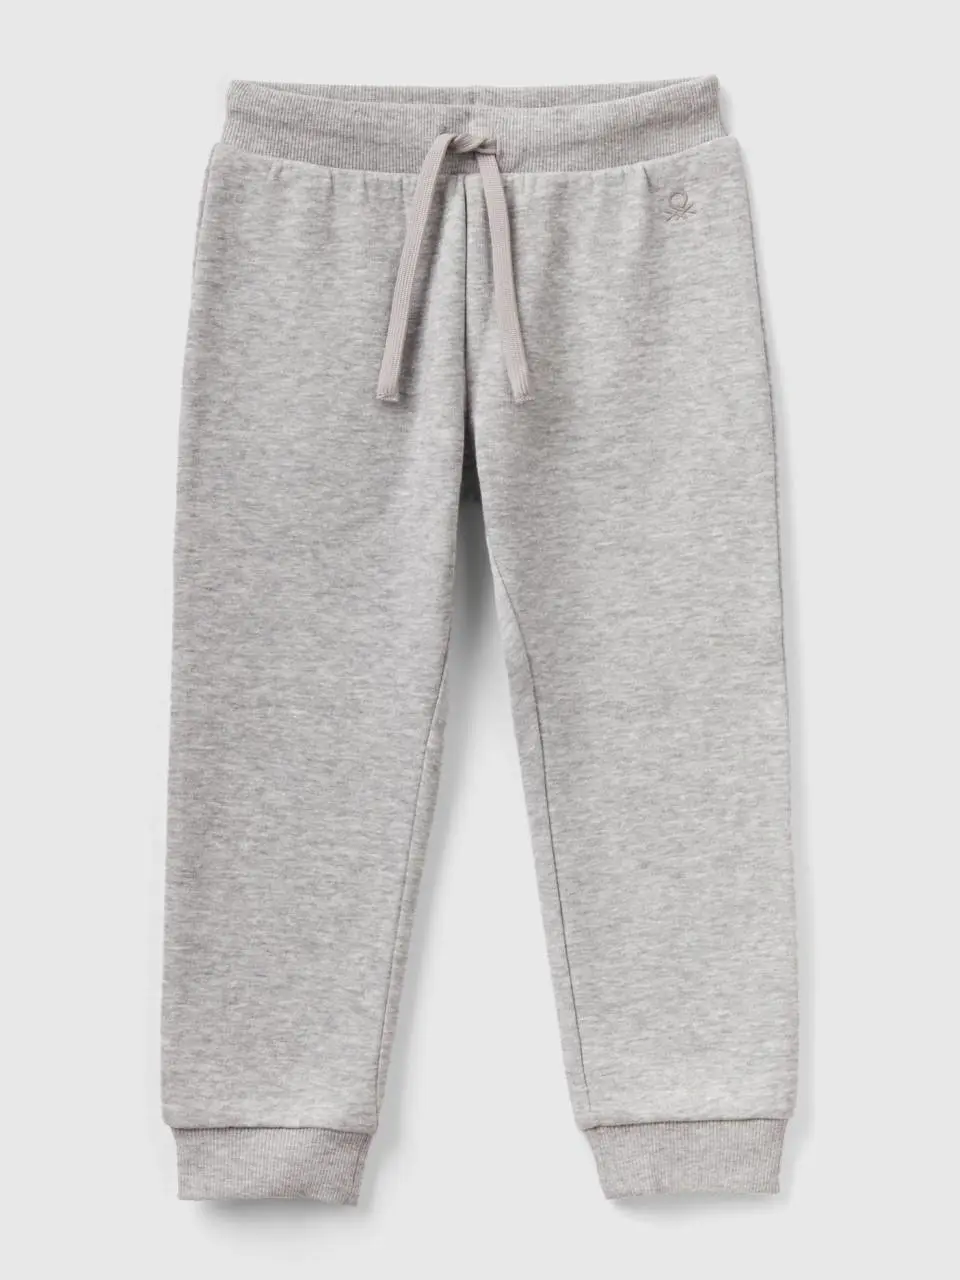 Benetton sweat joggers with drawstring. 1